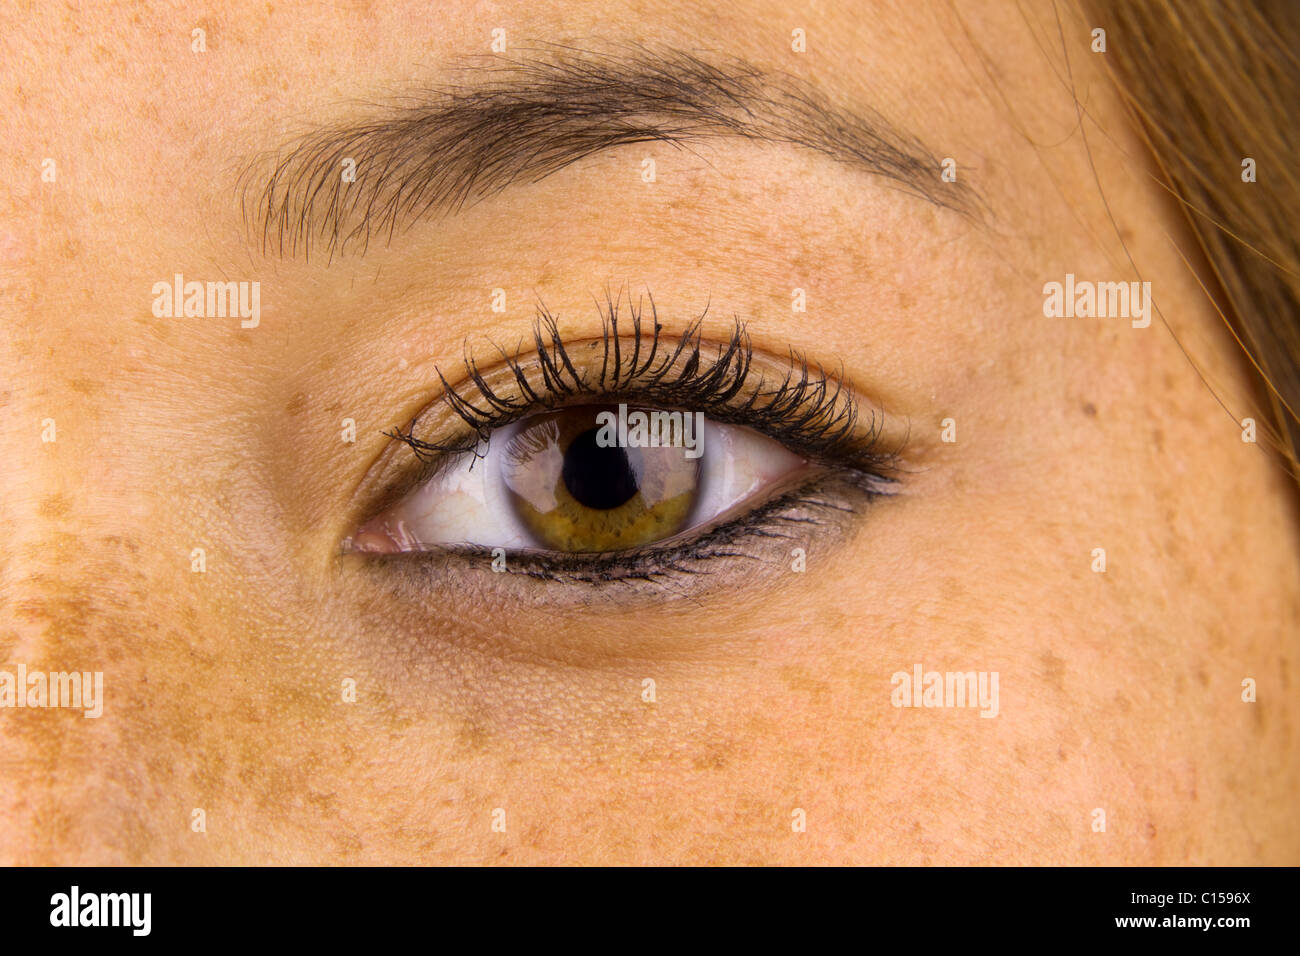 Close up of woman eye and surrounding skin showing sun damage, commonly known as freckles. Stock Photo